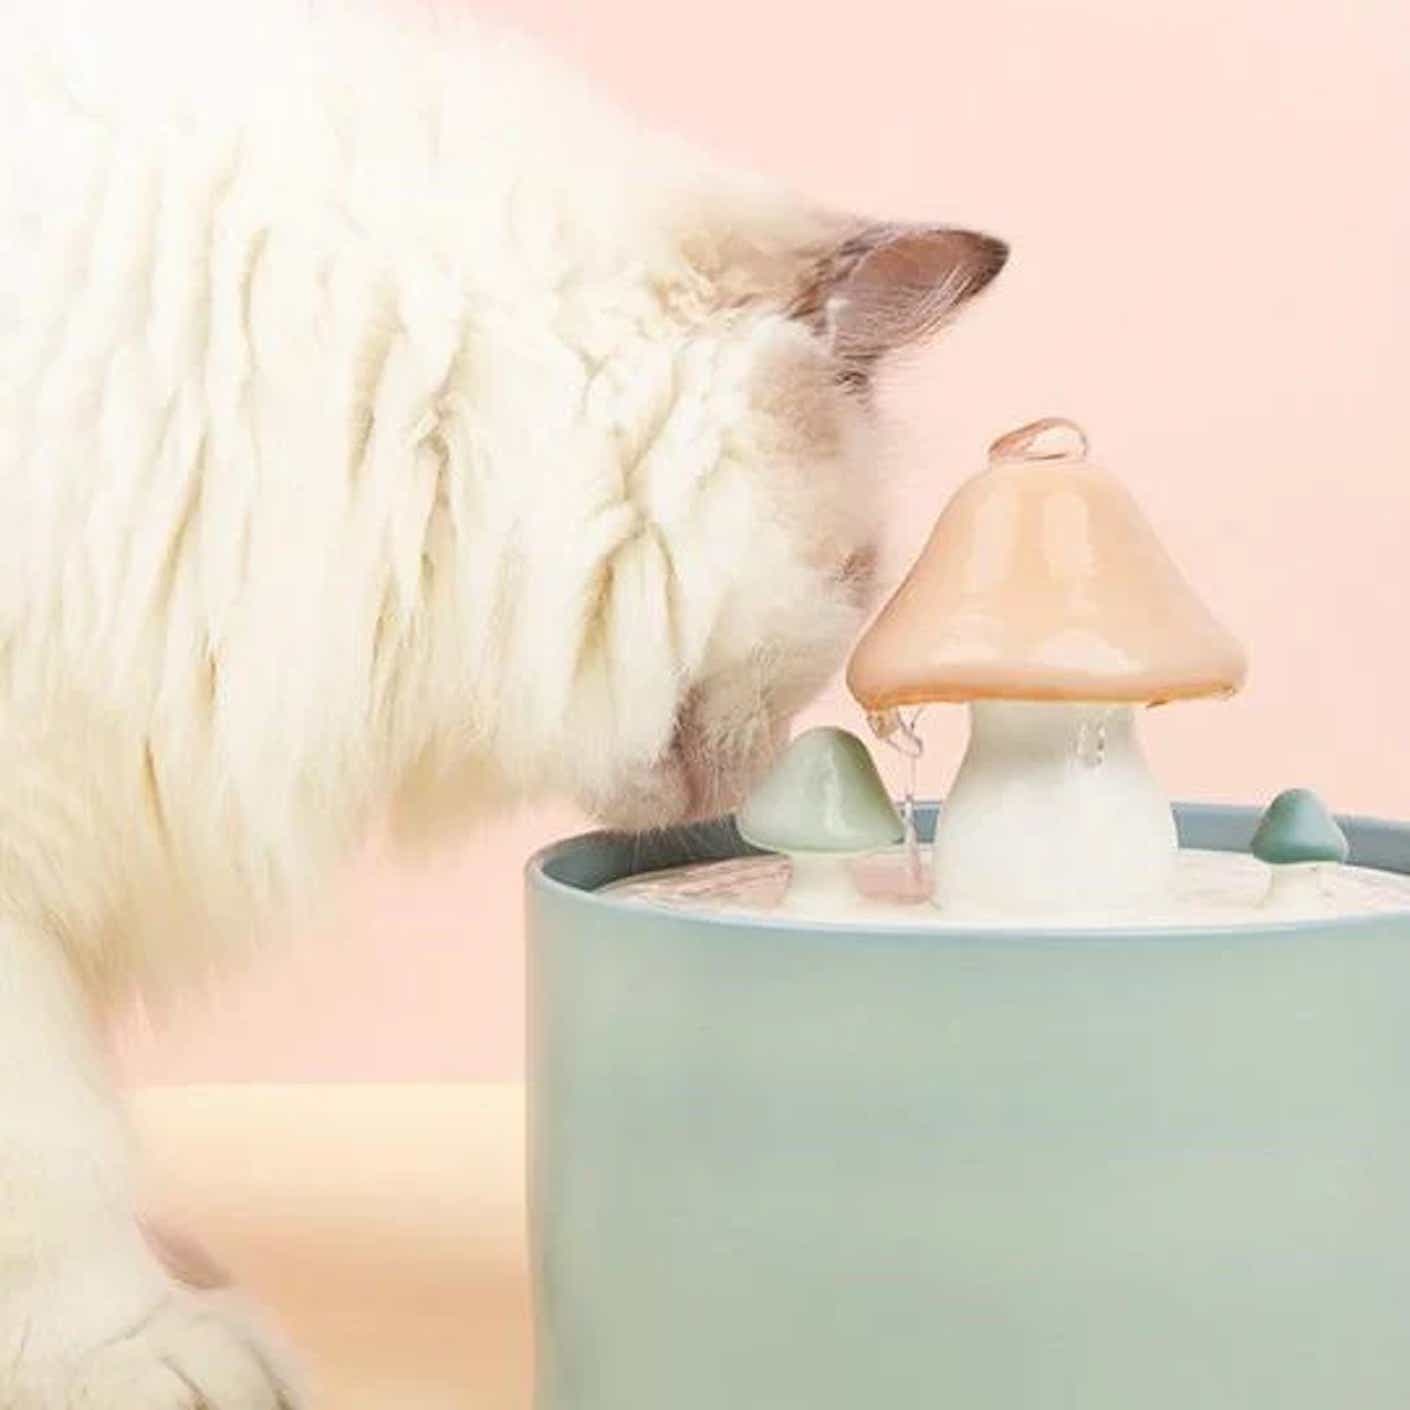 A fluffy cat dips its head into a ceramic cat fountain with mushroom stalks in its center/